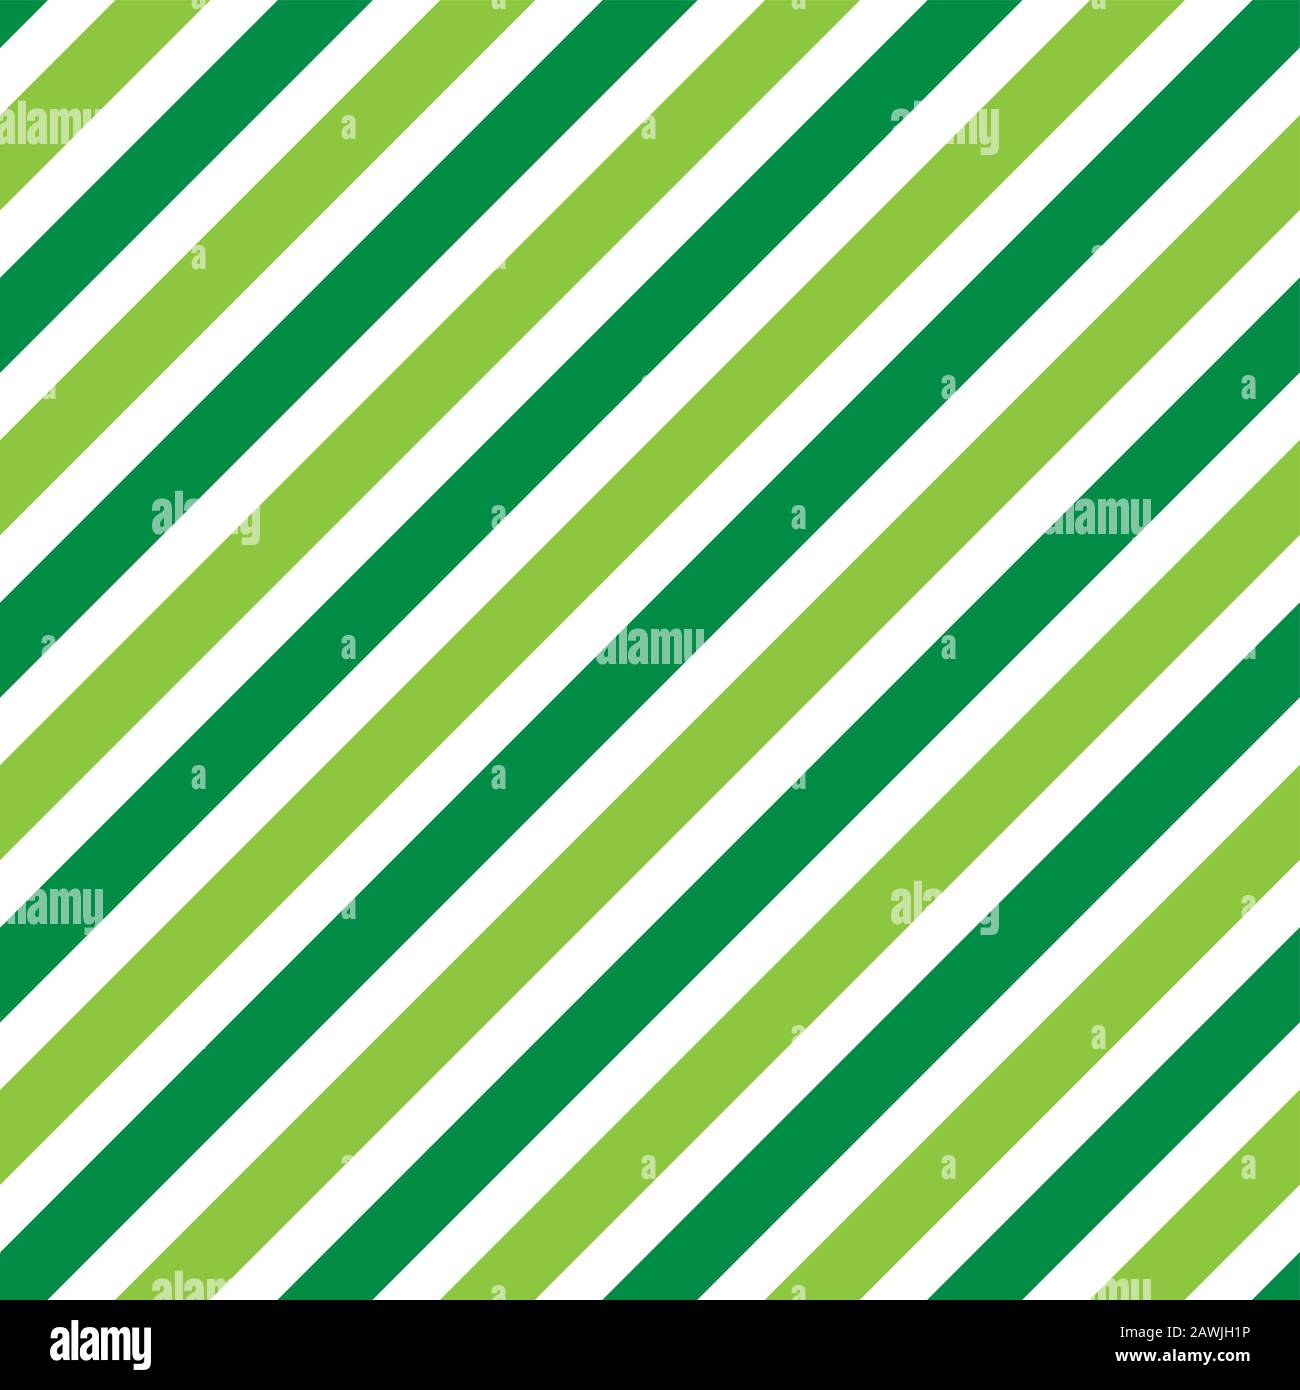 Seamless Christmas stripes wrapping paper pattern Stock Vector Image ...